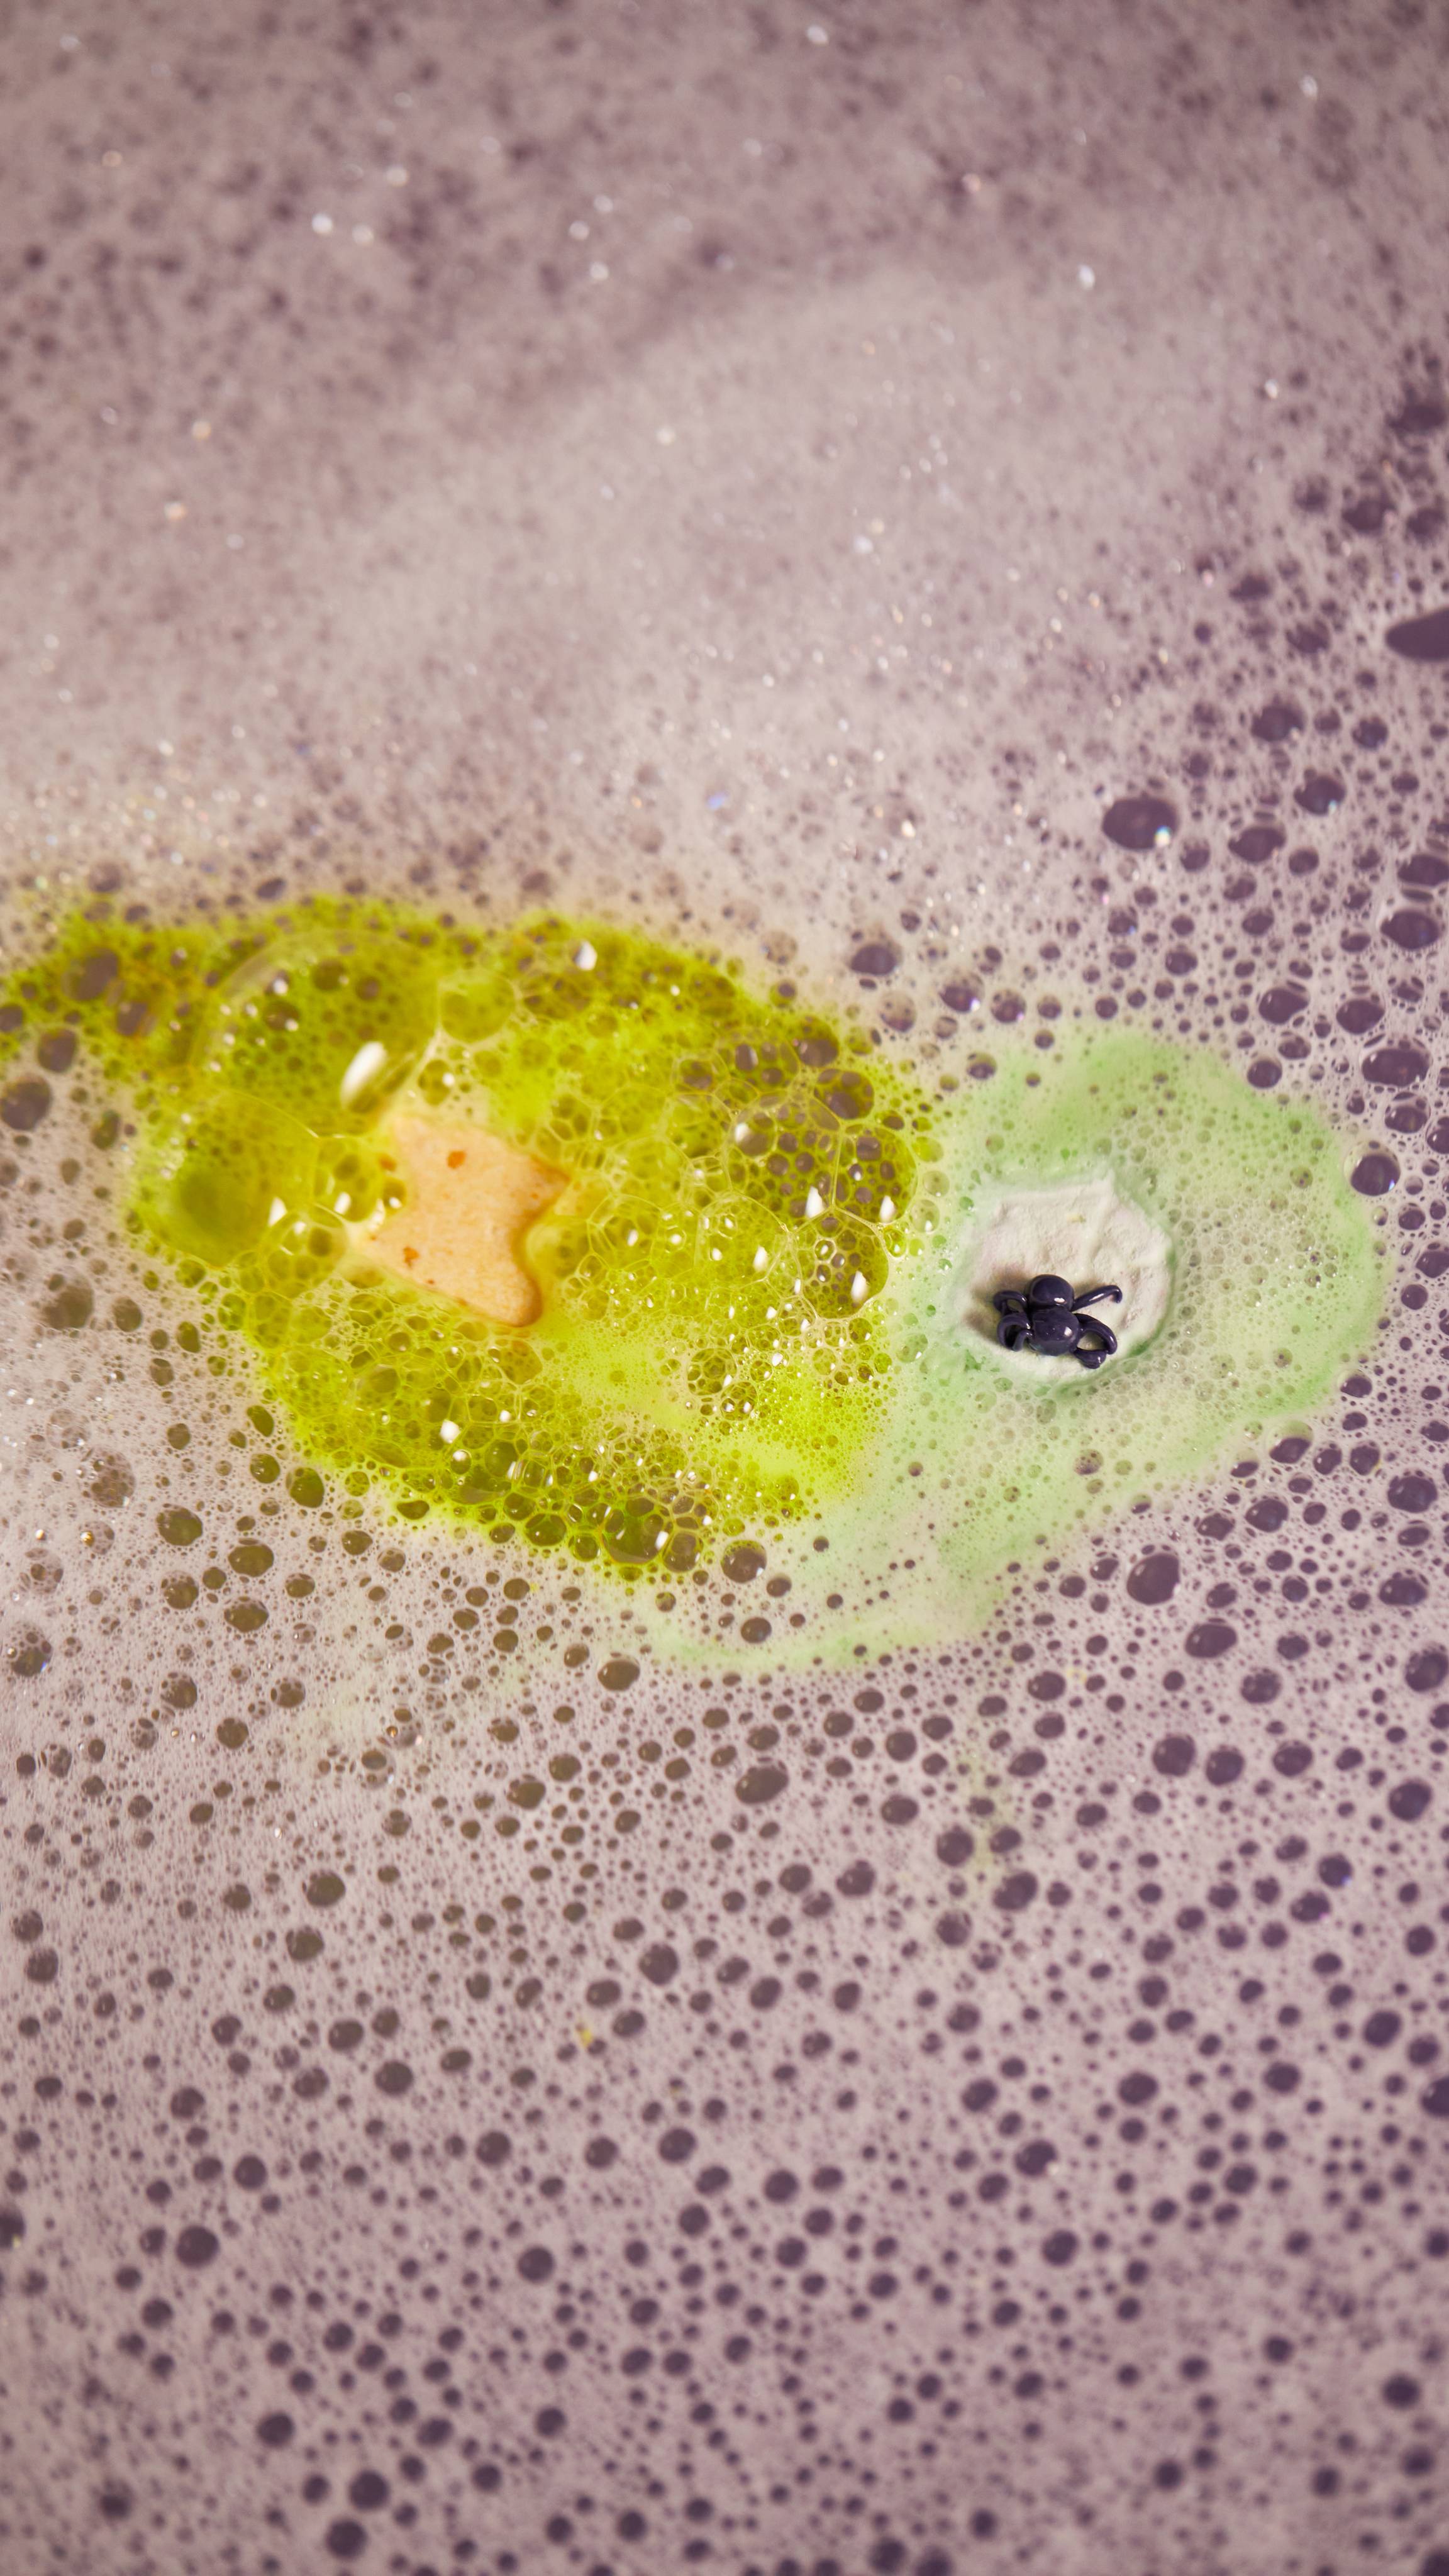 A close-up of the bubbly bathwater focusing on the luminous green surround the lightning bolt and spider web fun product.